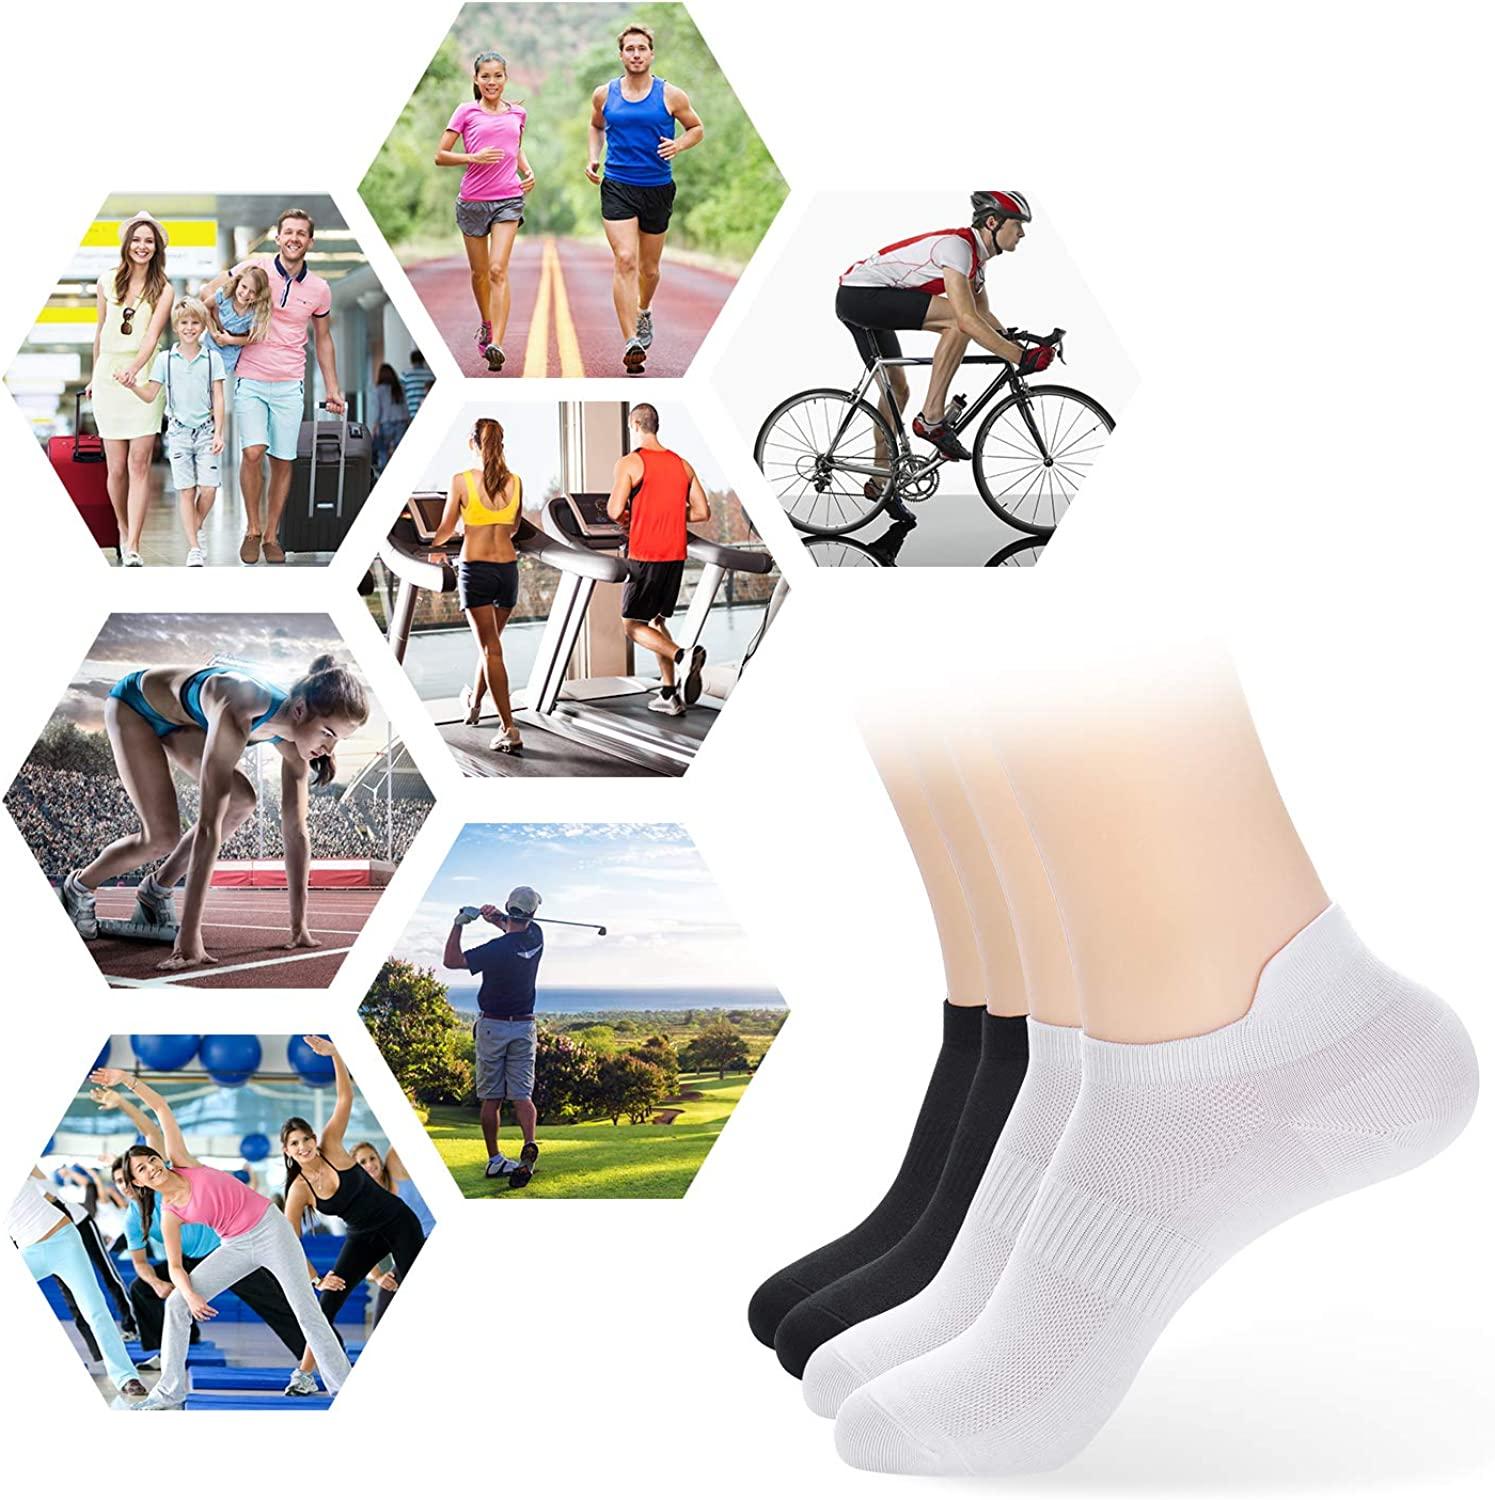  ATBITER Ankle Socks Womens and Men 8/6Pairs Thin Athletic  Running Low Cut No Show Socks With Heel Tab : Clothing, Shoes & Jewelry